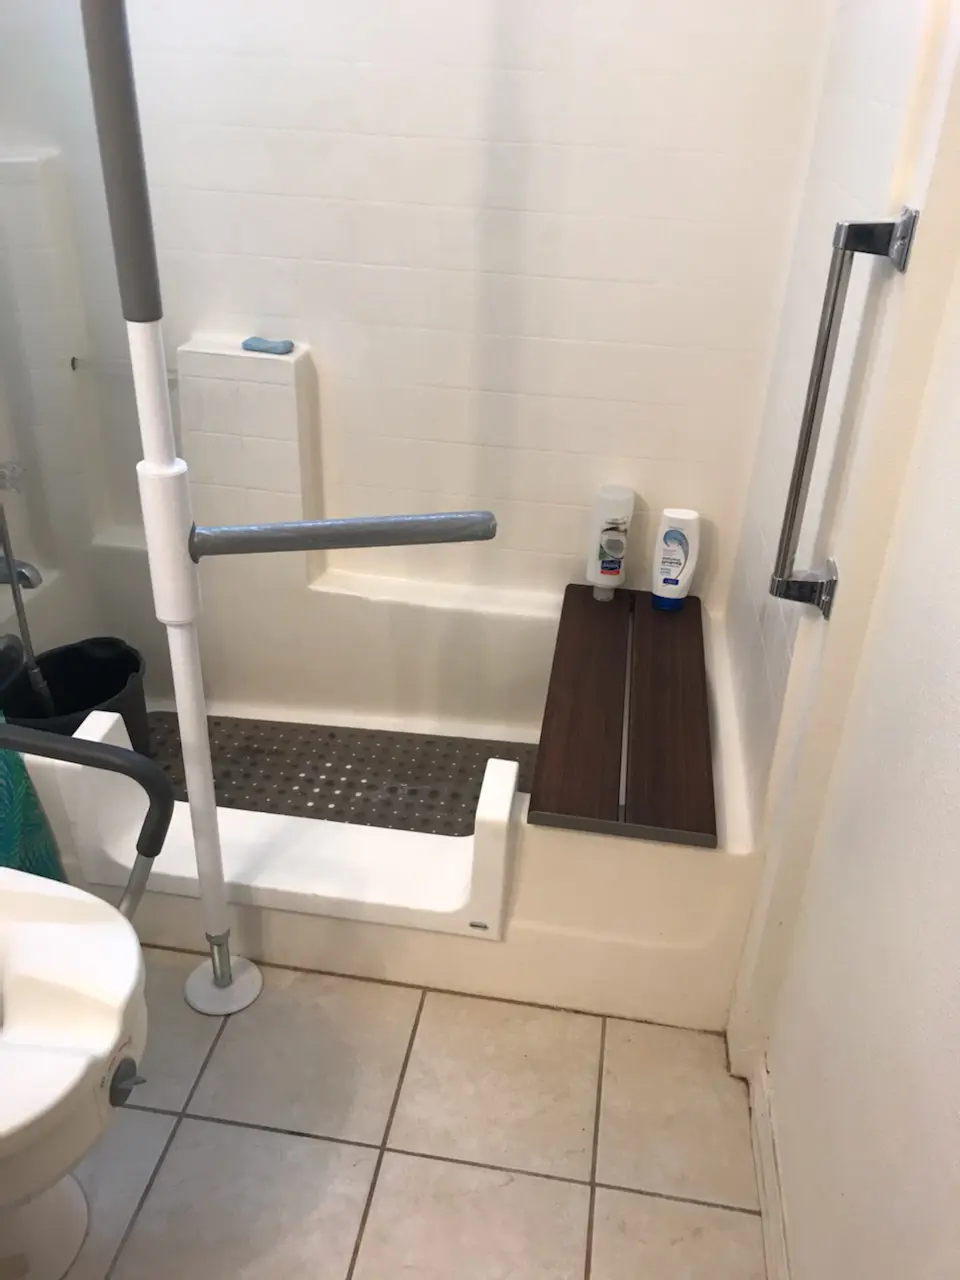 tub cut out for elderly